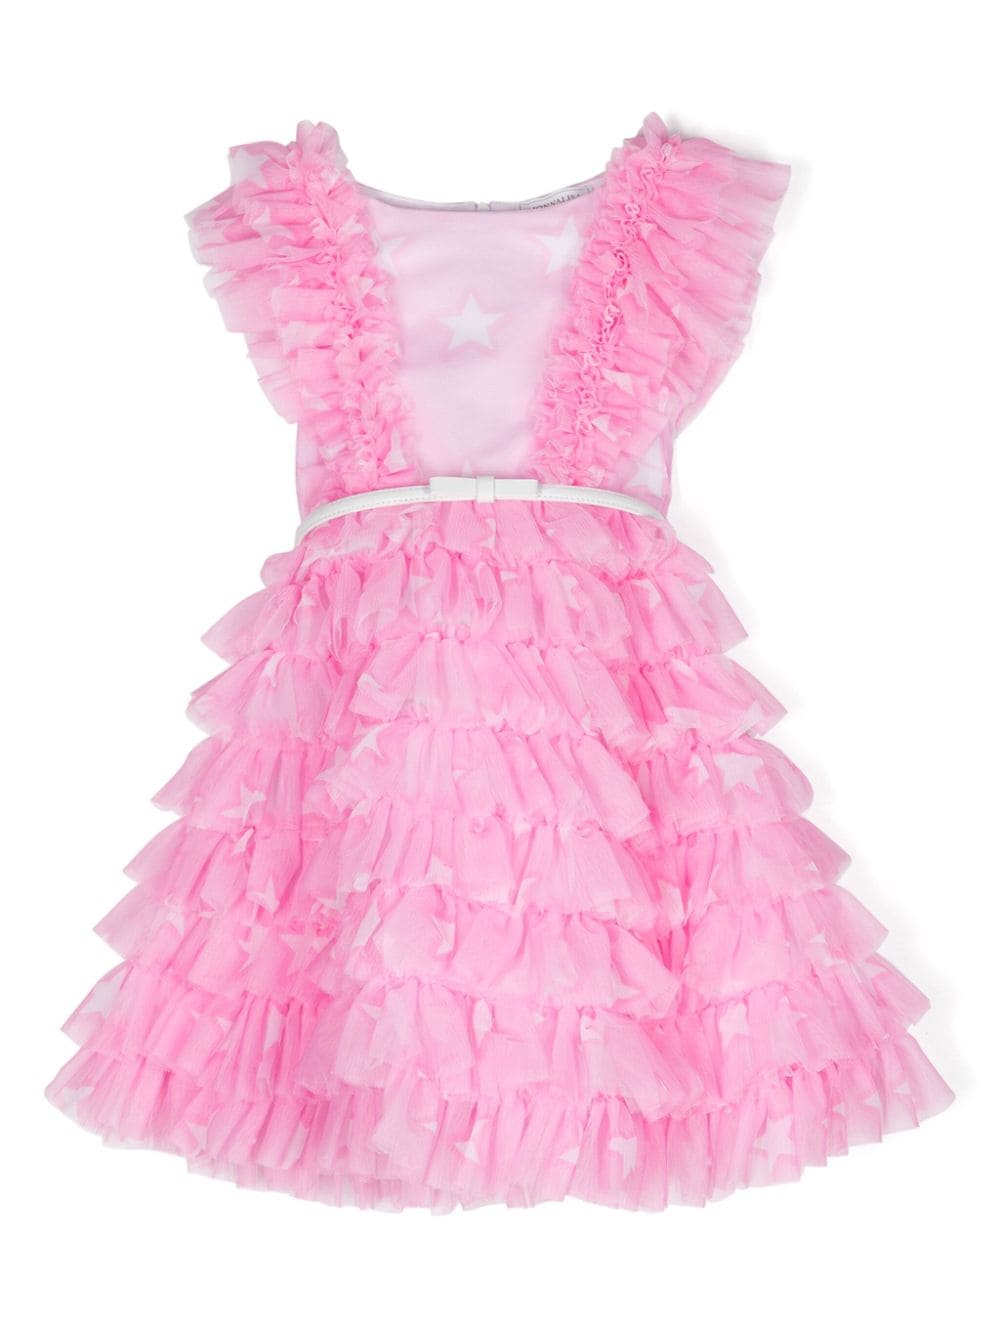 Pink printed tulle dress with ruffles